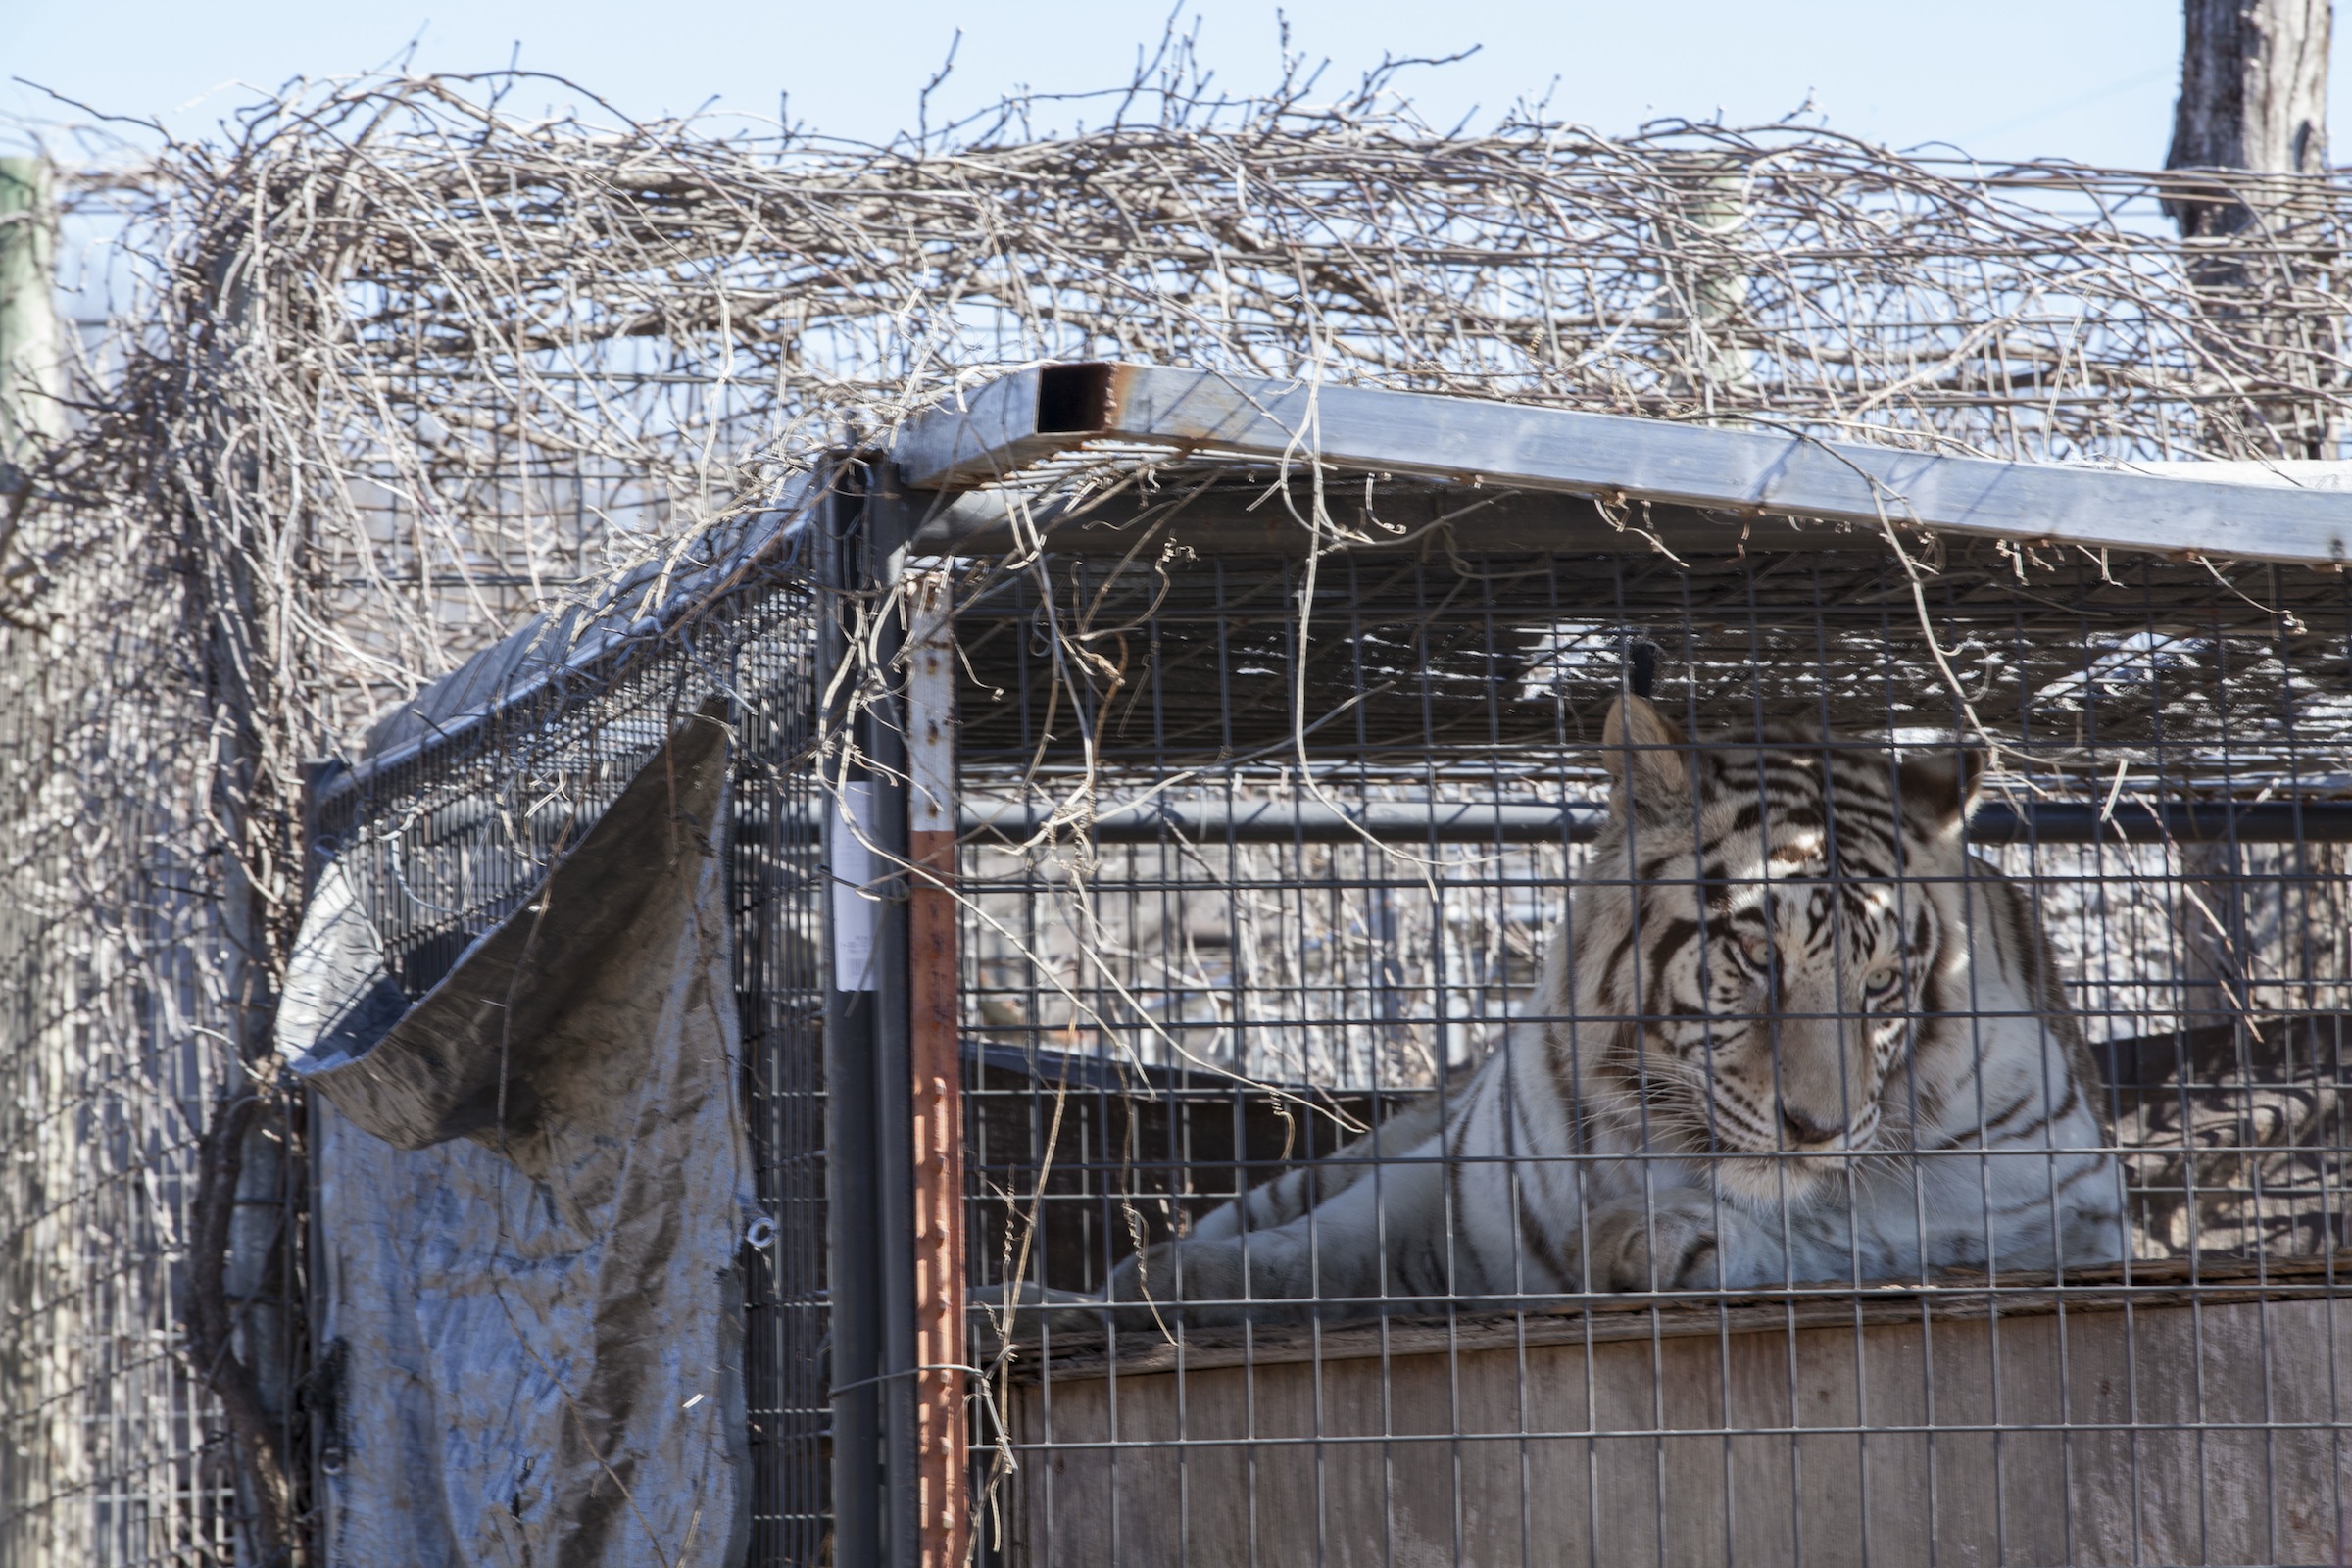 A tiger in Arkansas lived in a small, overgrown cage that was no longer structurally sound before being rescued. With support from IFAW, this tiger was rescued and moved to nearby GFAS accredited sanctuary, Turpentine Creek Wildlife Refuge. (Photo: IFAW)